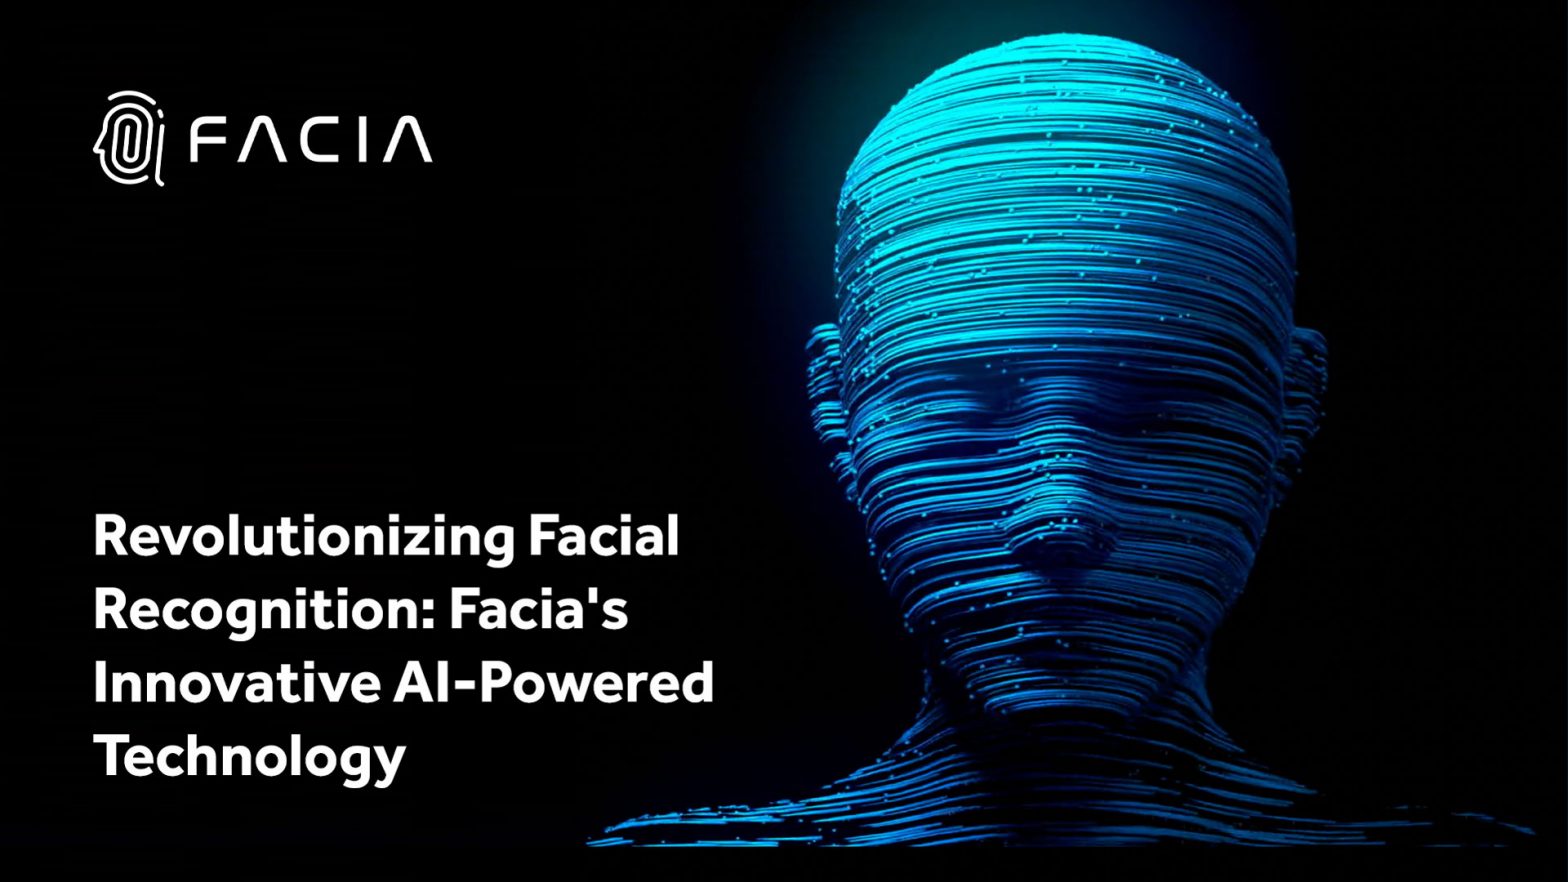 Facia’s shared its Innovative AI-Powered face liveness detection Technology & Steals the Show at Leap Expo